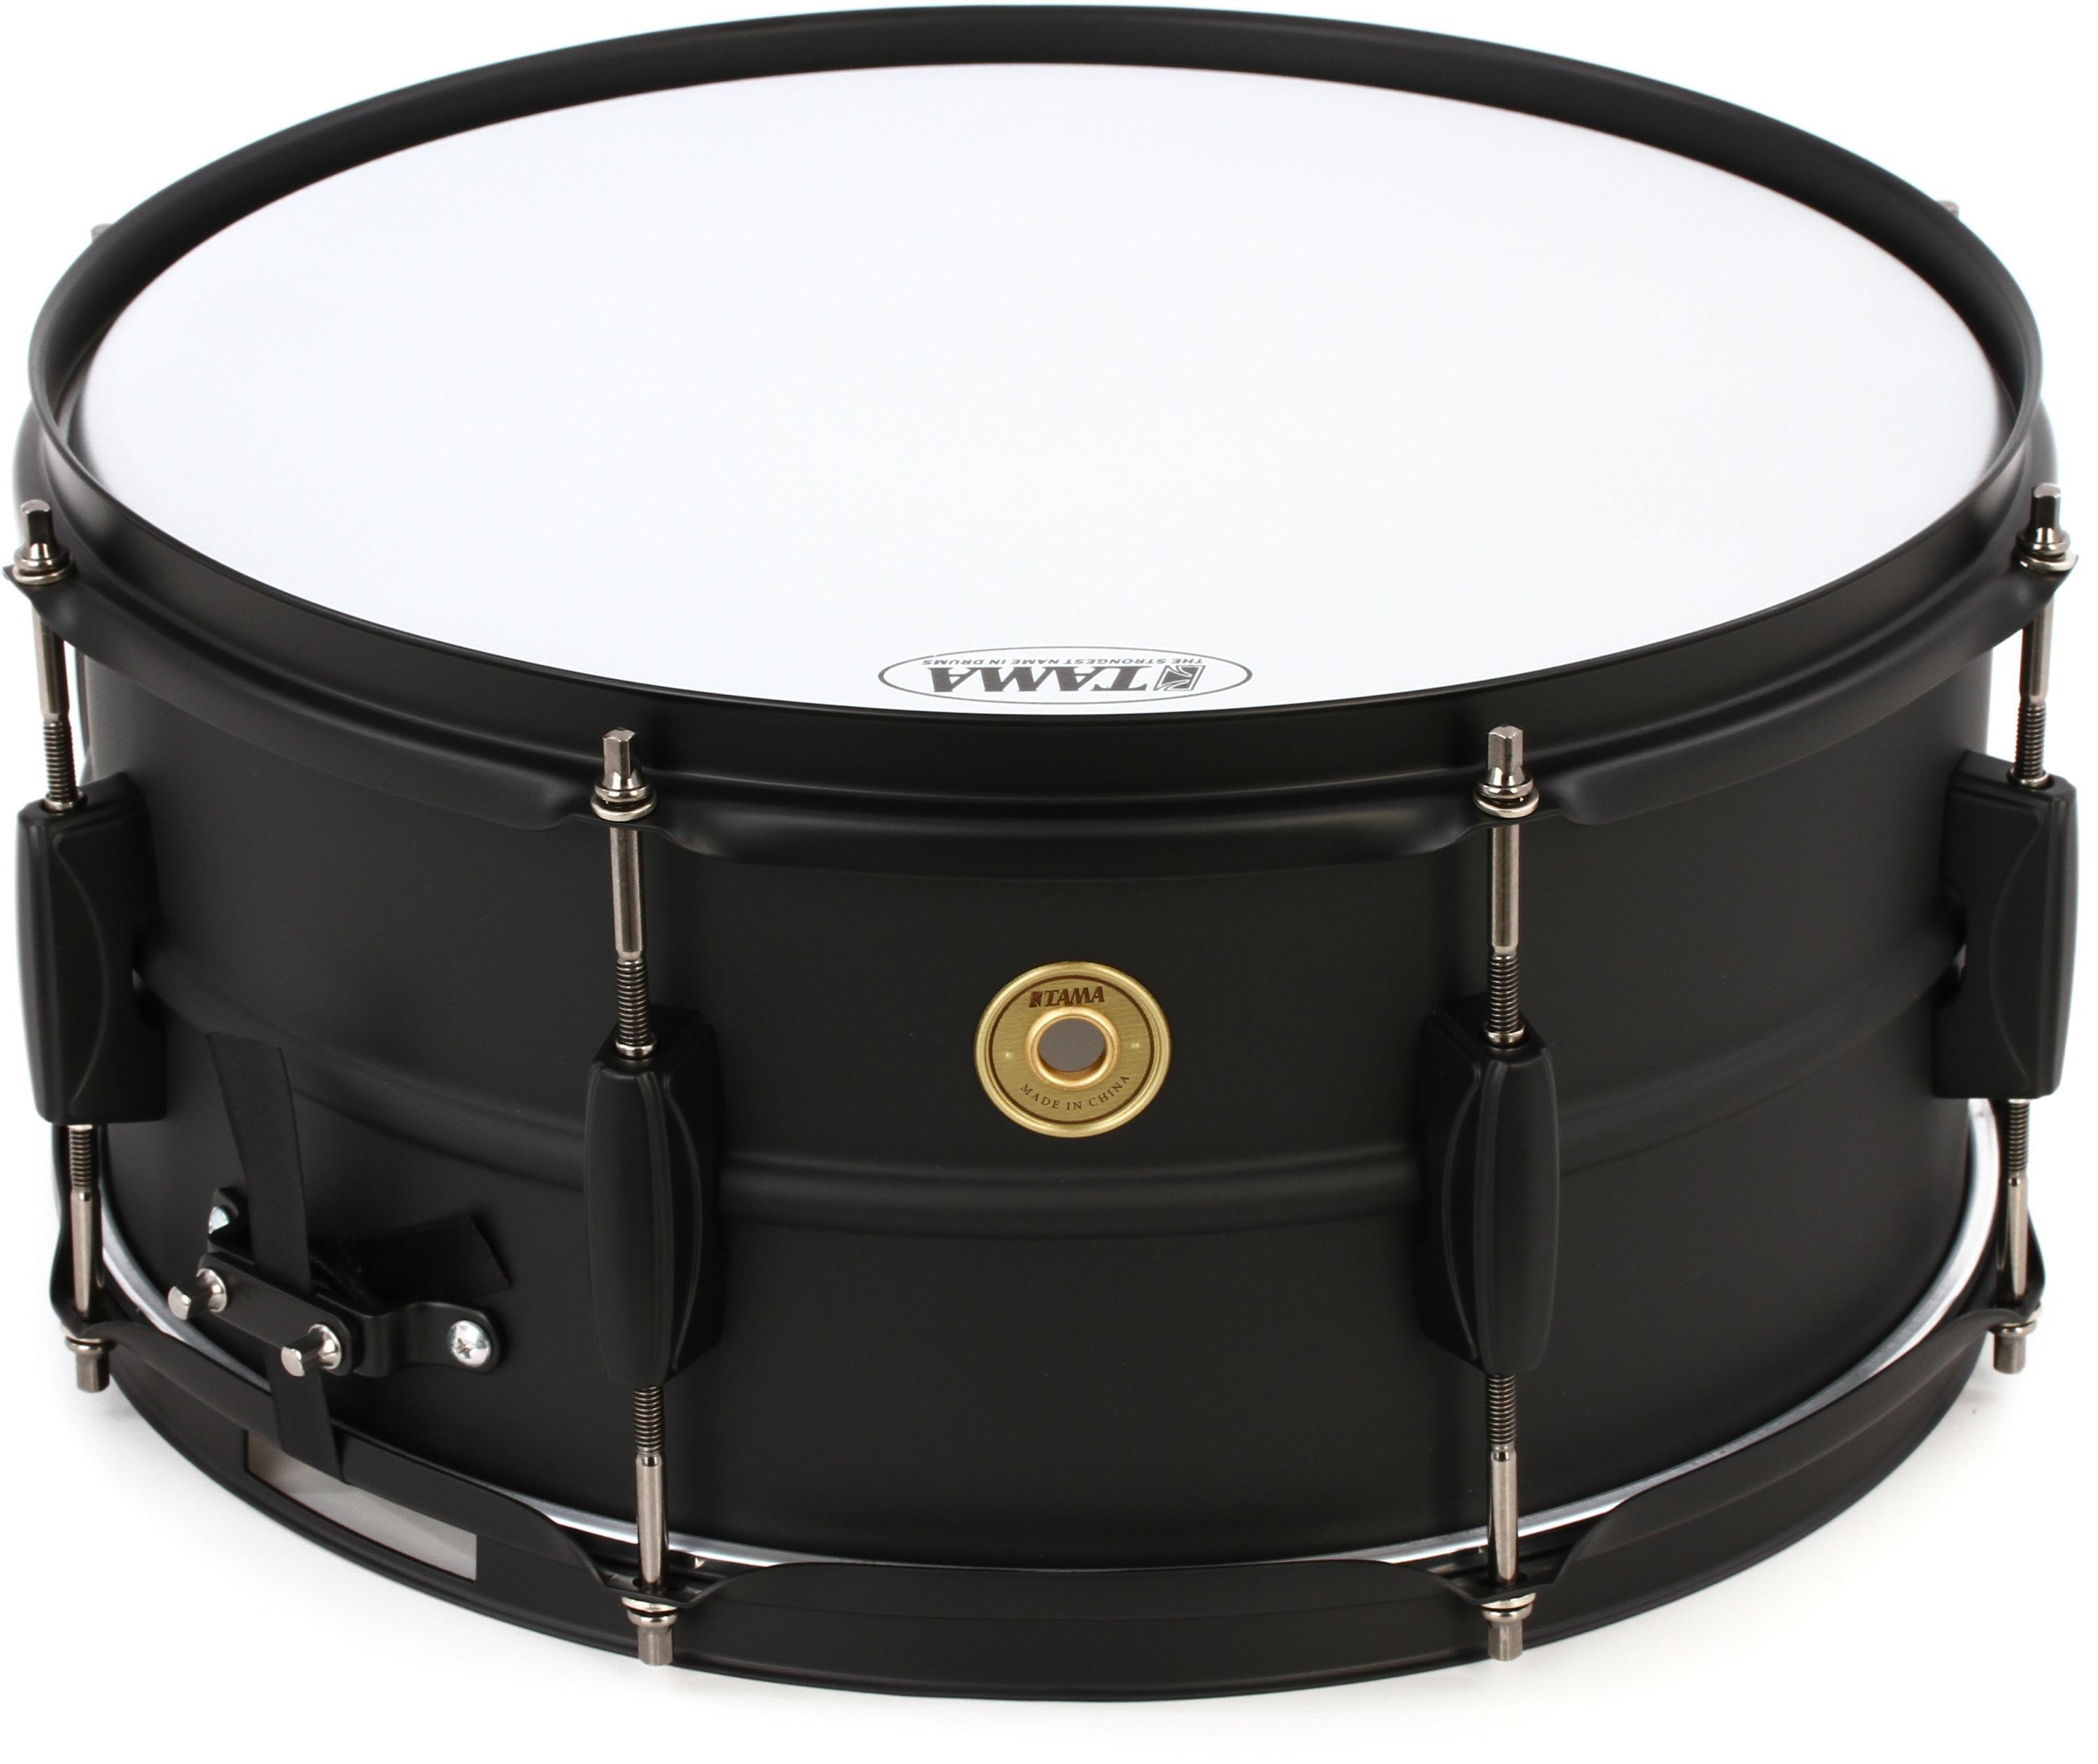 Omega Music  TAMA Metalworks Black Steel Caisse Claire 14x5.5